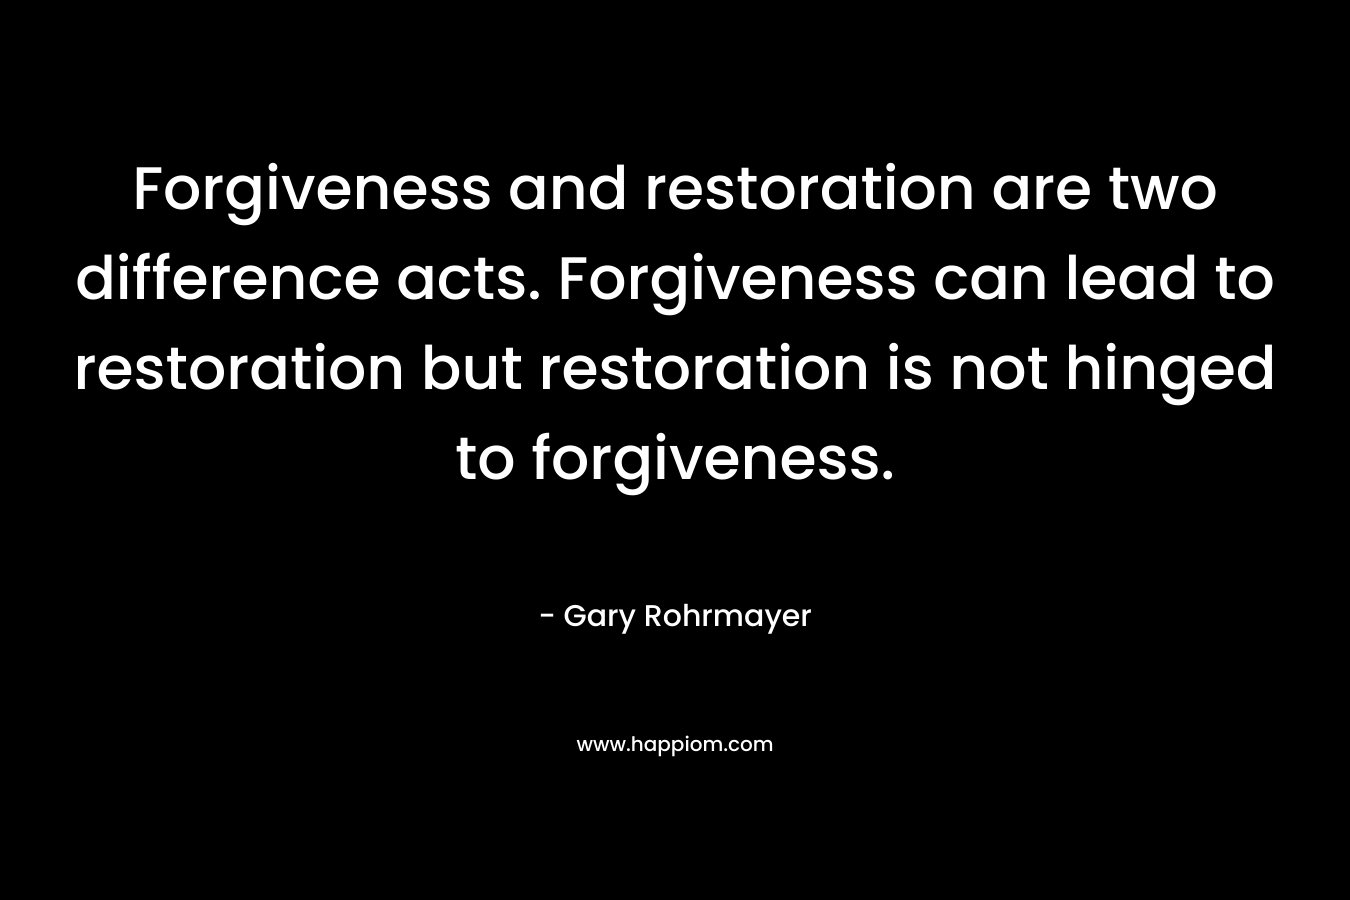 Forgiveness and restoration are two difference acts. Forgiveness can lead to restoration but restoration is not hinged to forgiveness.